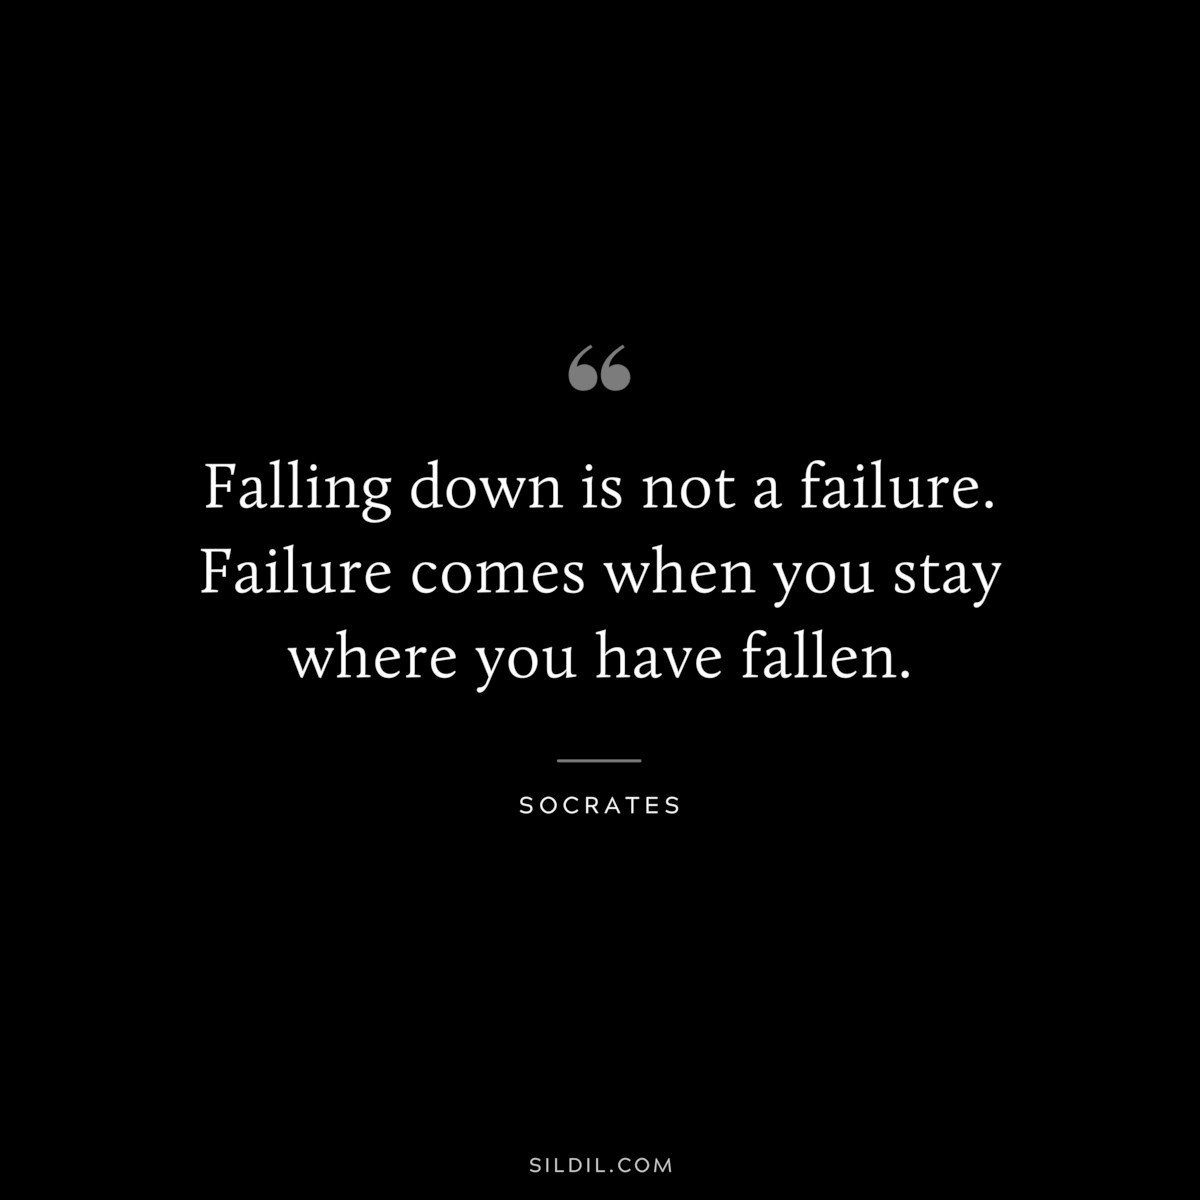 Falling down is not a failure. Failure comes when you stay where you have fallen. ― Socrates